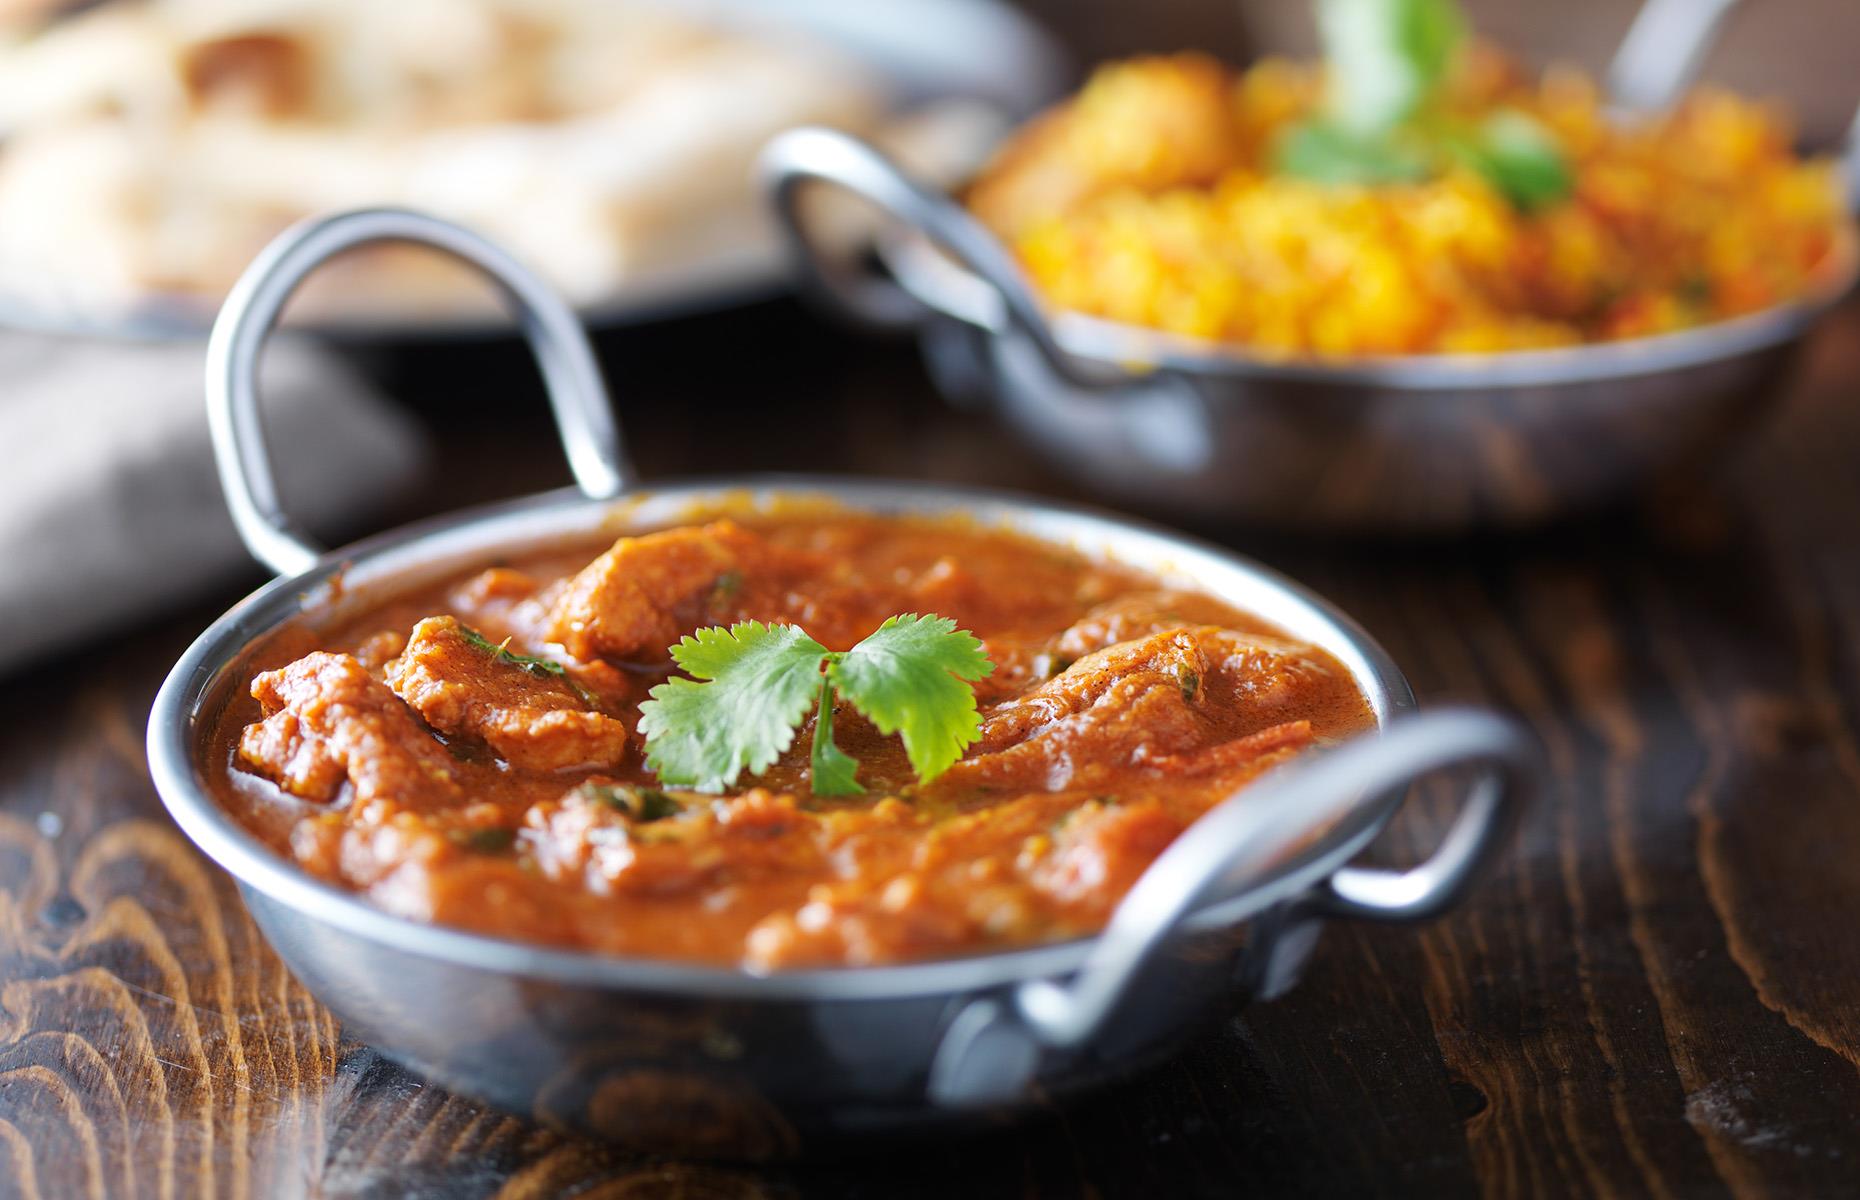 <p>Opting for the spiciest curry on the menu could well ruin your enjoyment of the meal. Chili tastes good in moderation, and the spice can rev up your metabolism temporarily – but too much of a good thing will blow your palate and cause discomfort. One study designed to discover why chili is so satisfying found the reason was not that it affected hunger hormones, but that it caused symptoms such as bloating and nausea, putting people off eating entirely.</p>